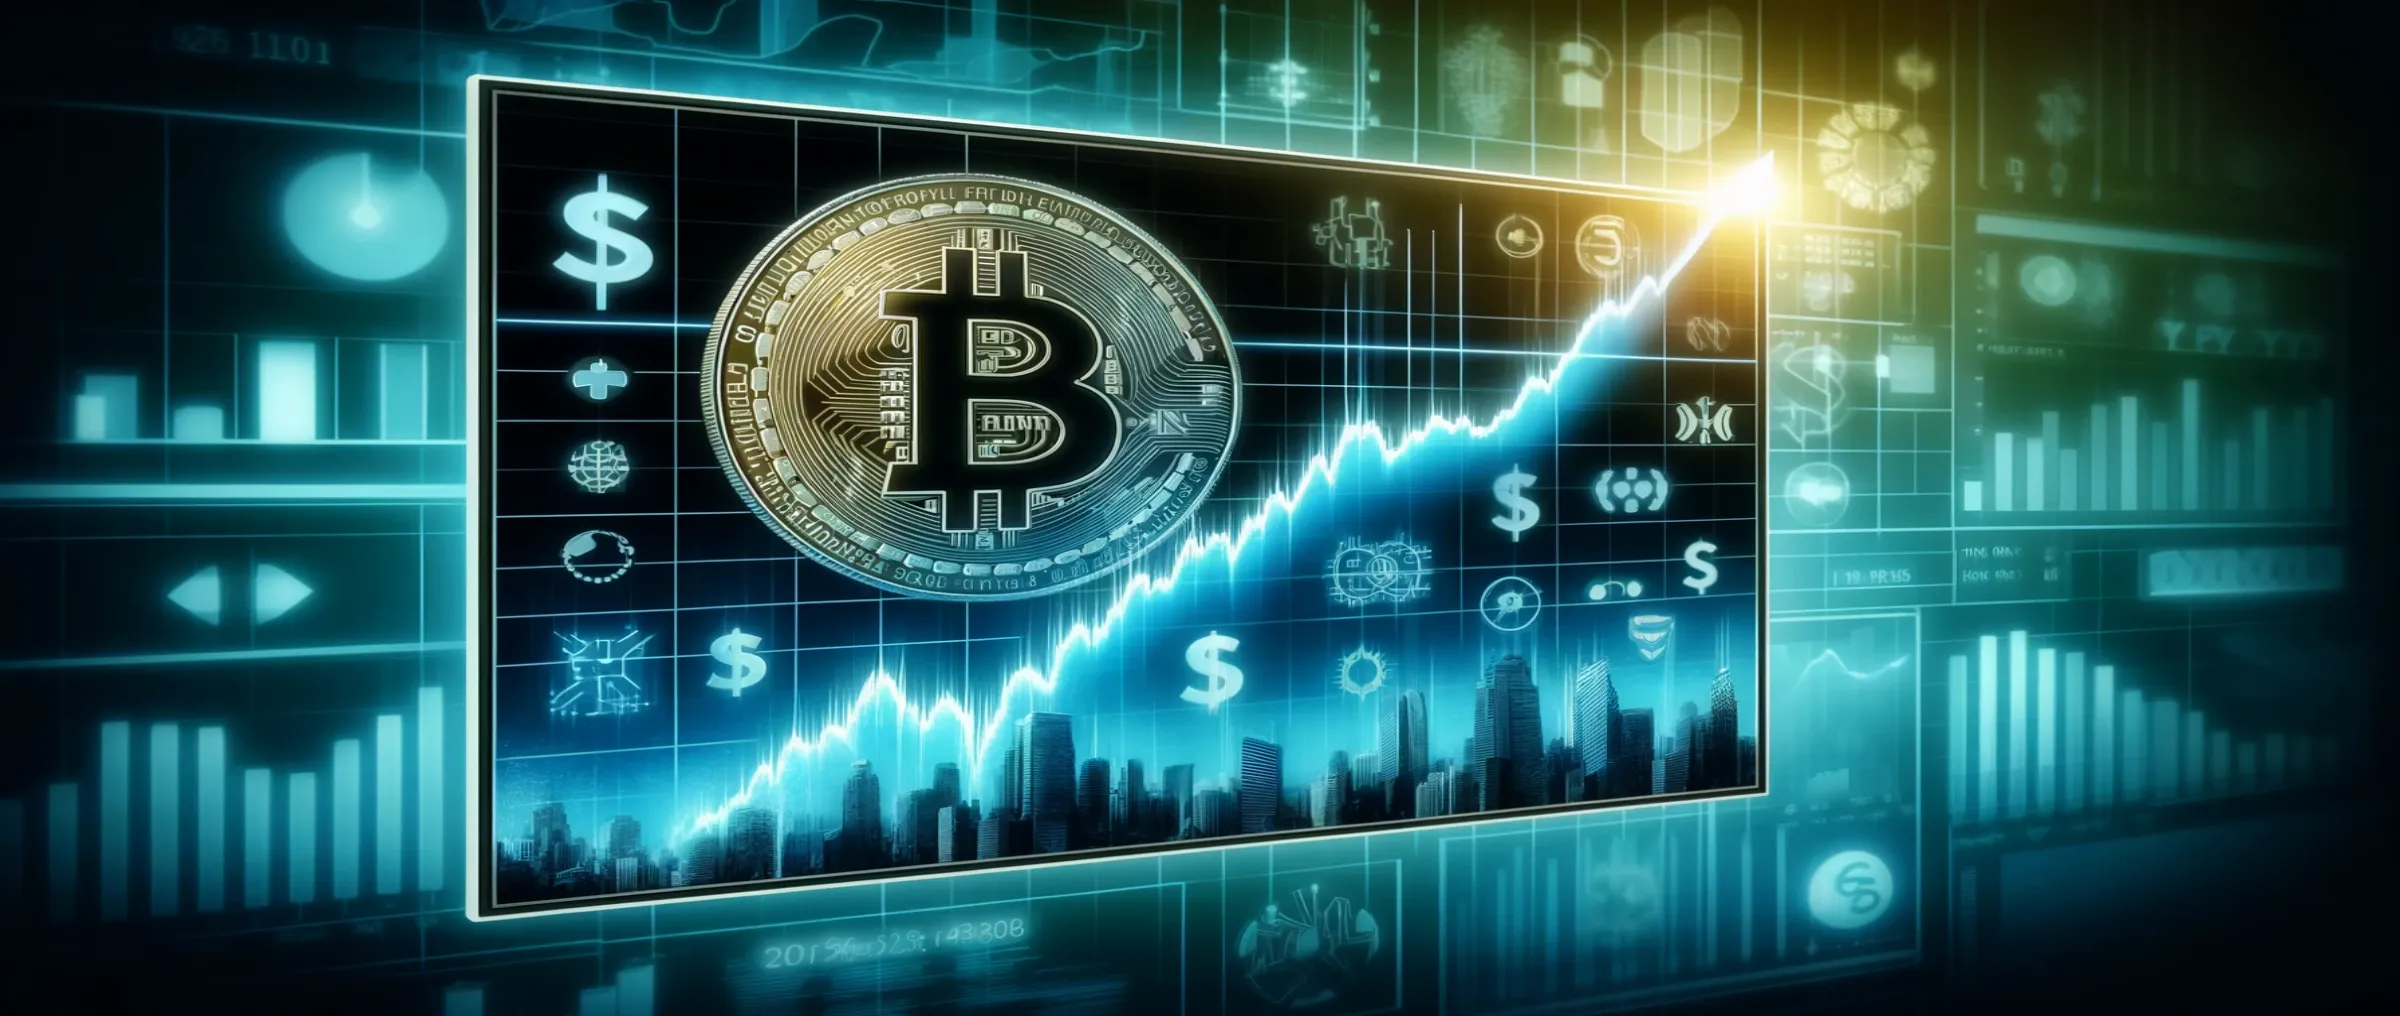 Bitcoin surpassed $71,000 amid an inflow of $880 million into BTC ETFs, marking the best performance since March